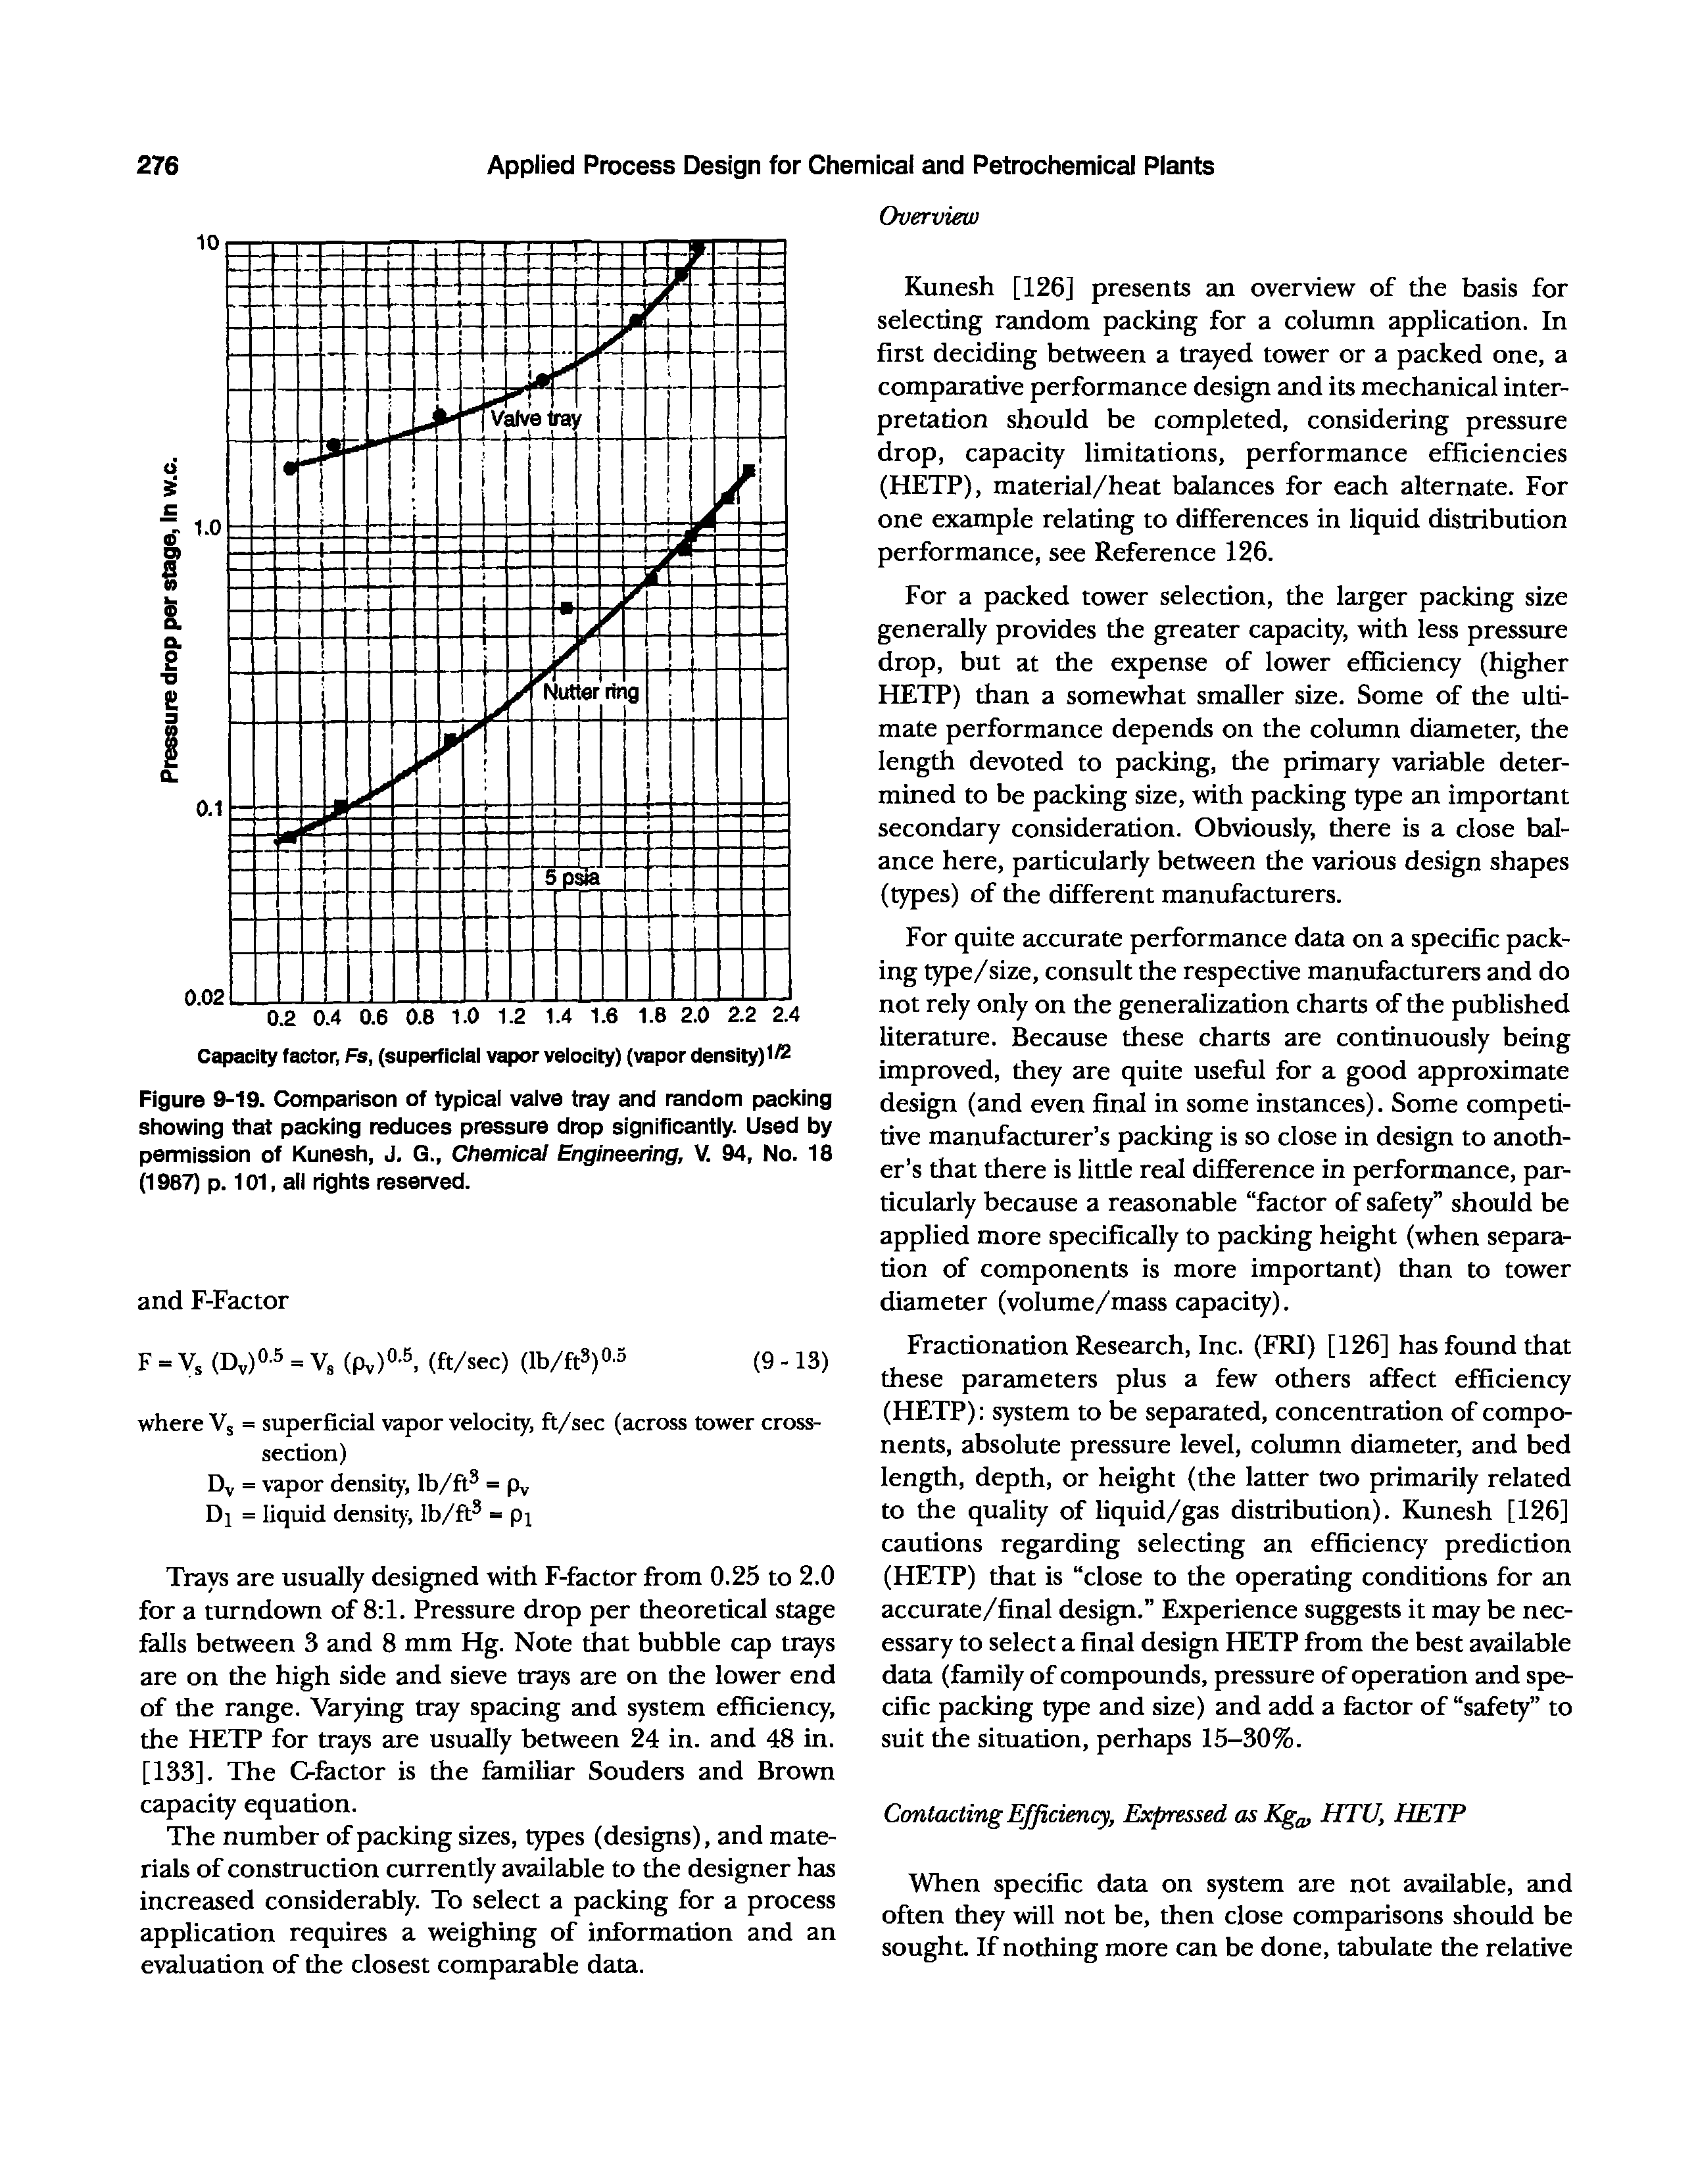 Figure 9-19. Comparison of typical valve tray and random packing showing that packing reduces pressure drop significantiy. Used by permission of Kunesh, J. G., Chemical Engineering, V. 94, No. 18 (1967) p. 101, ail rights reserved.